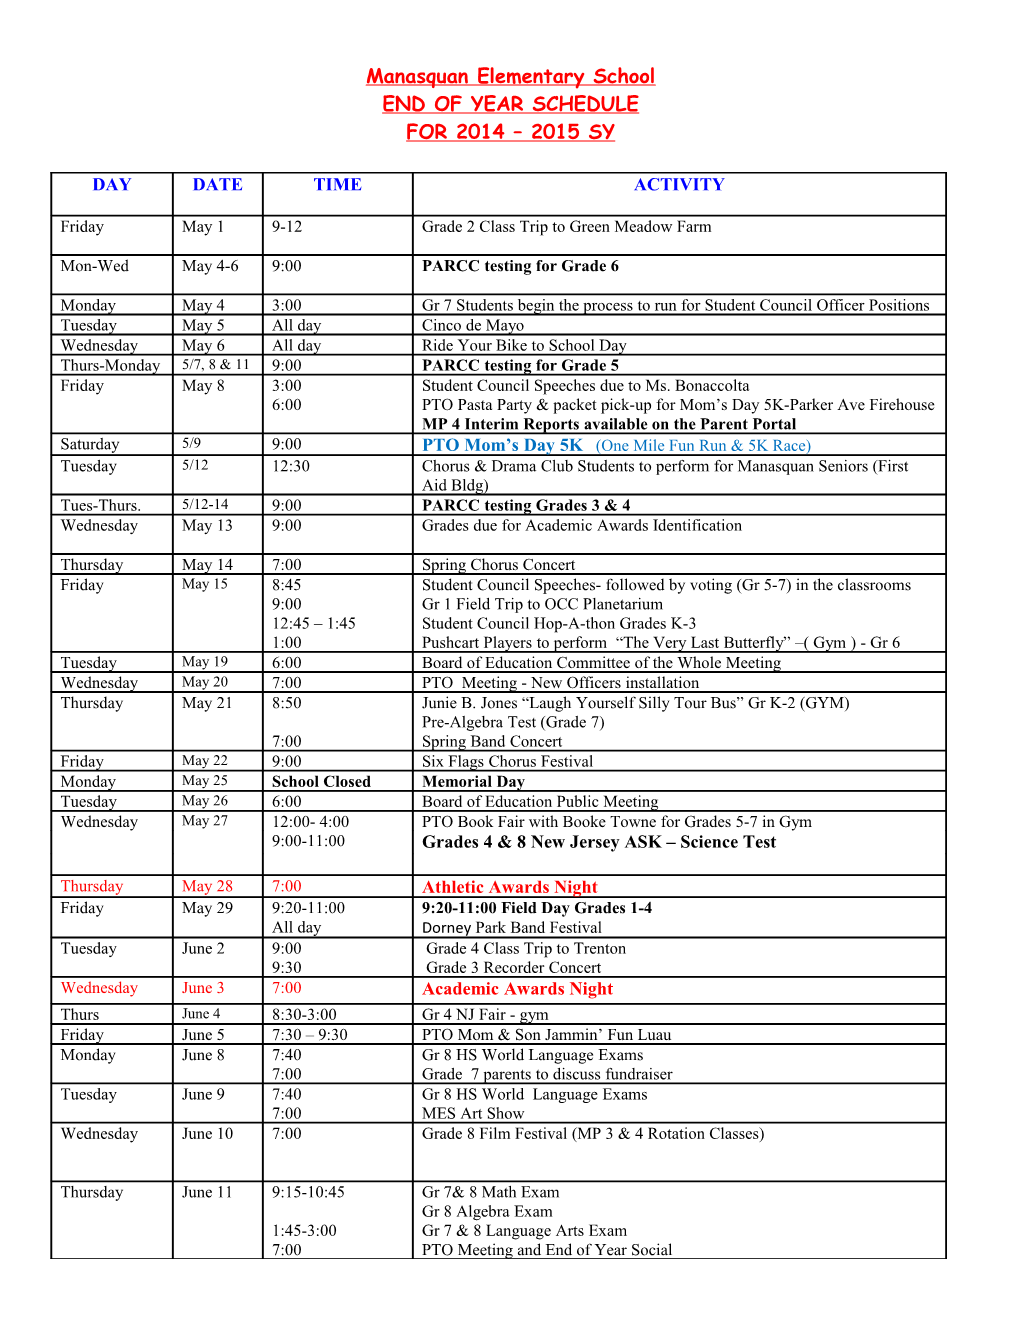 End of Year Schedule for 1999 - 2000